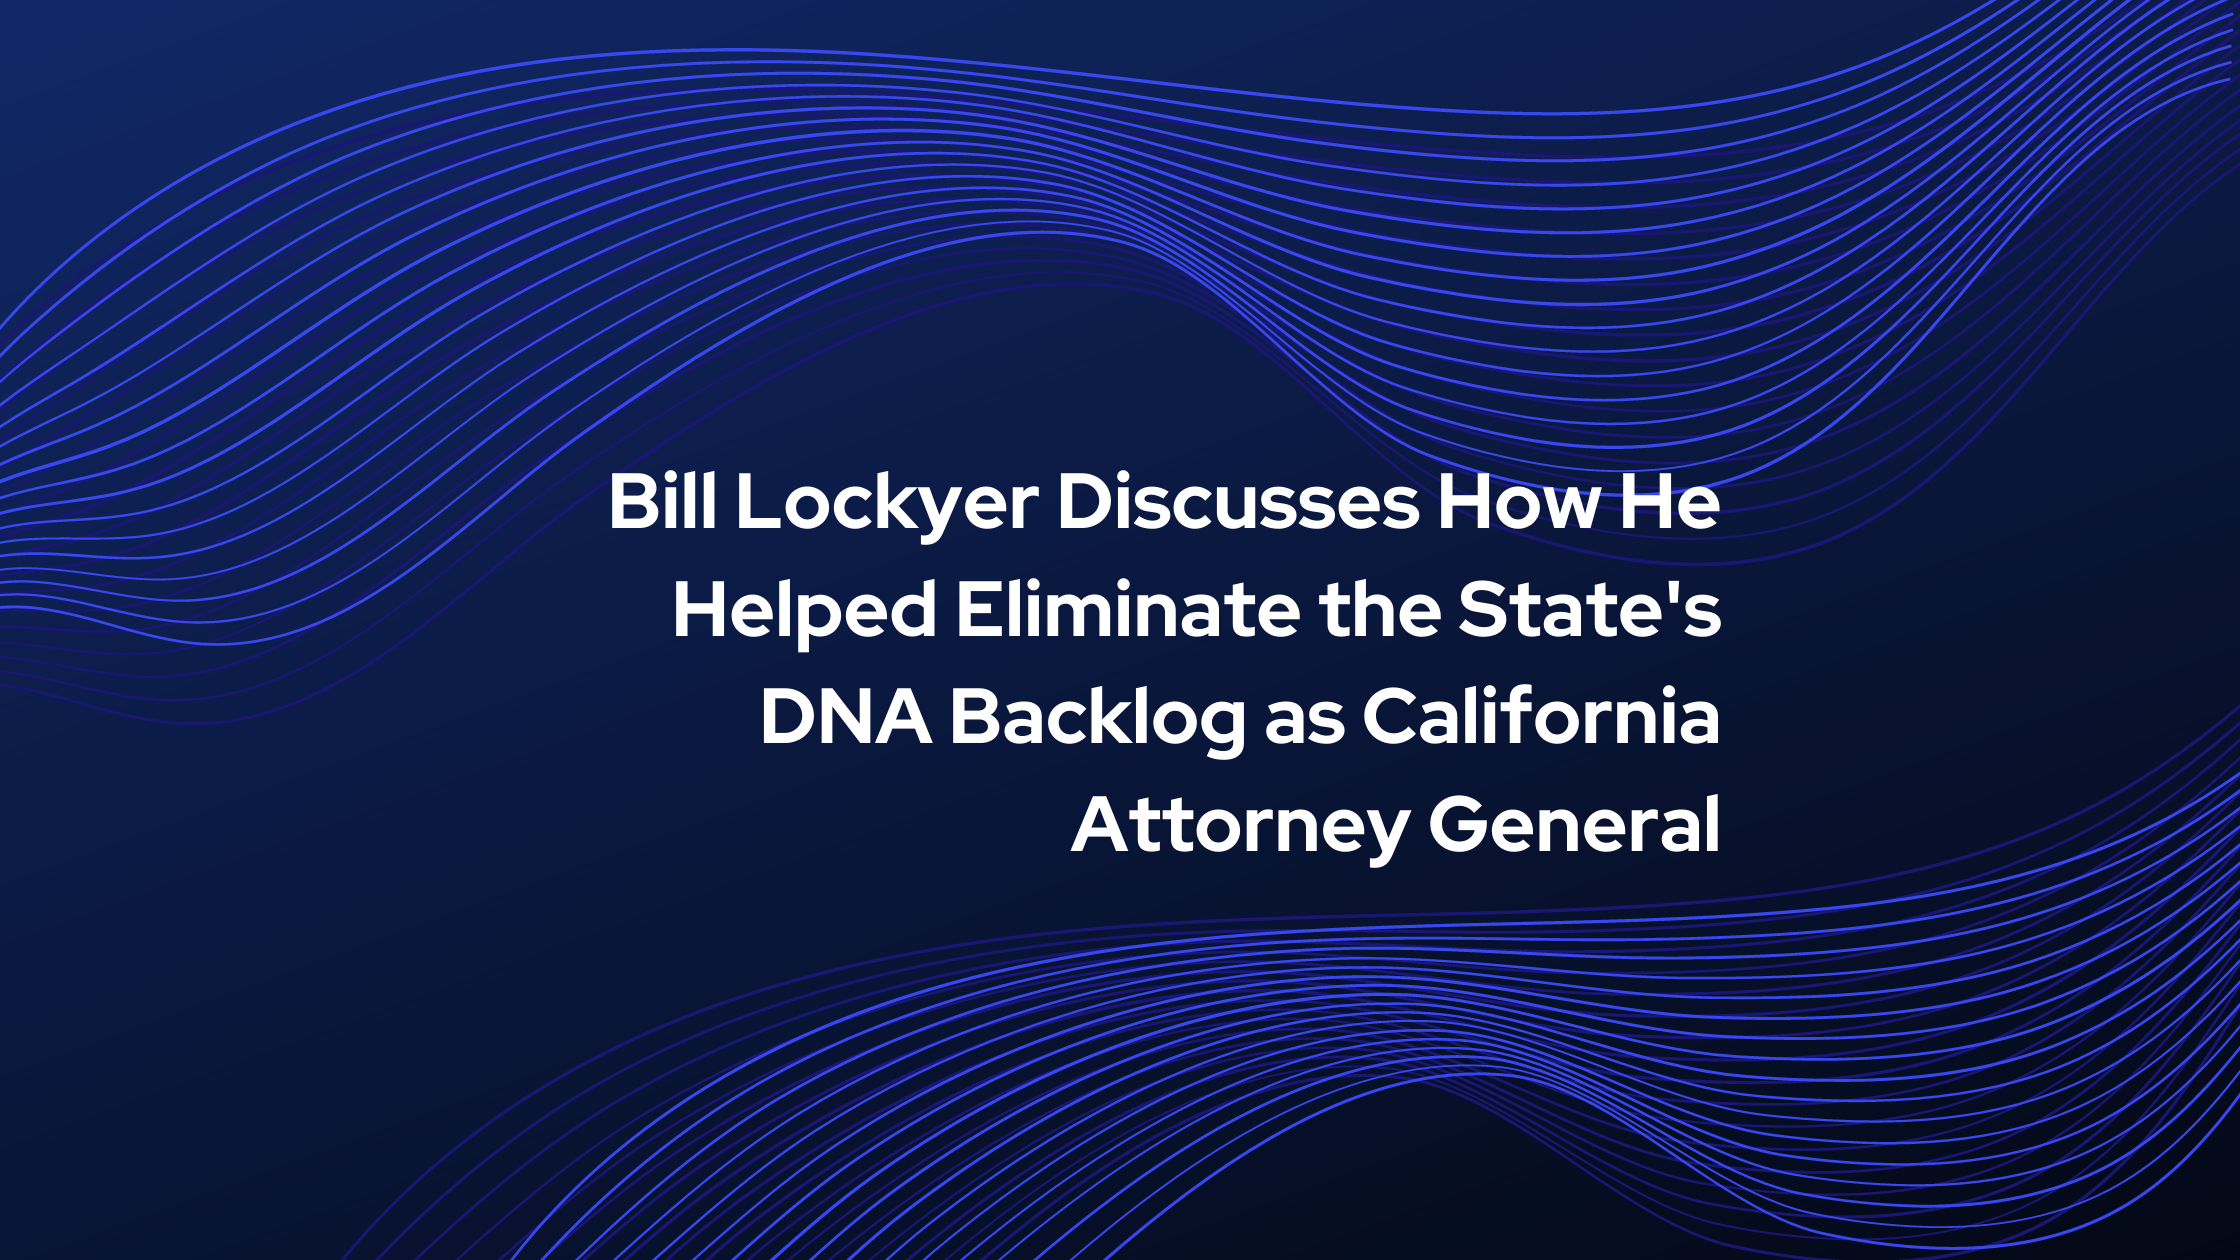 Bill Lockyer Discusses How He Helped Eliminate the States DNA Backlog as California Attorney General